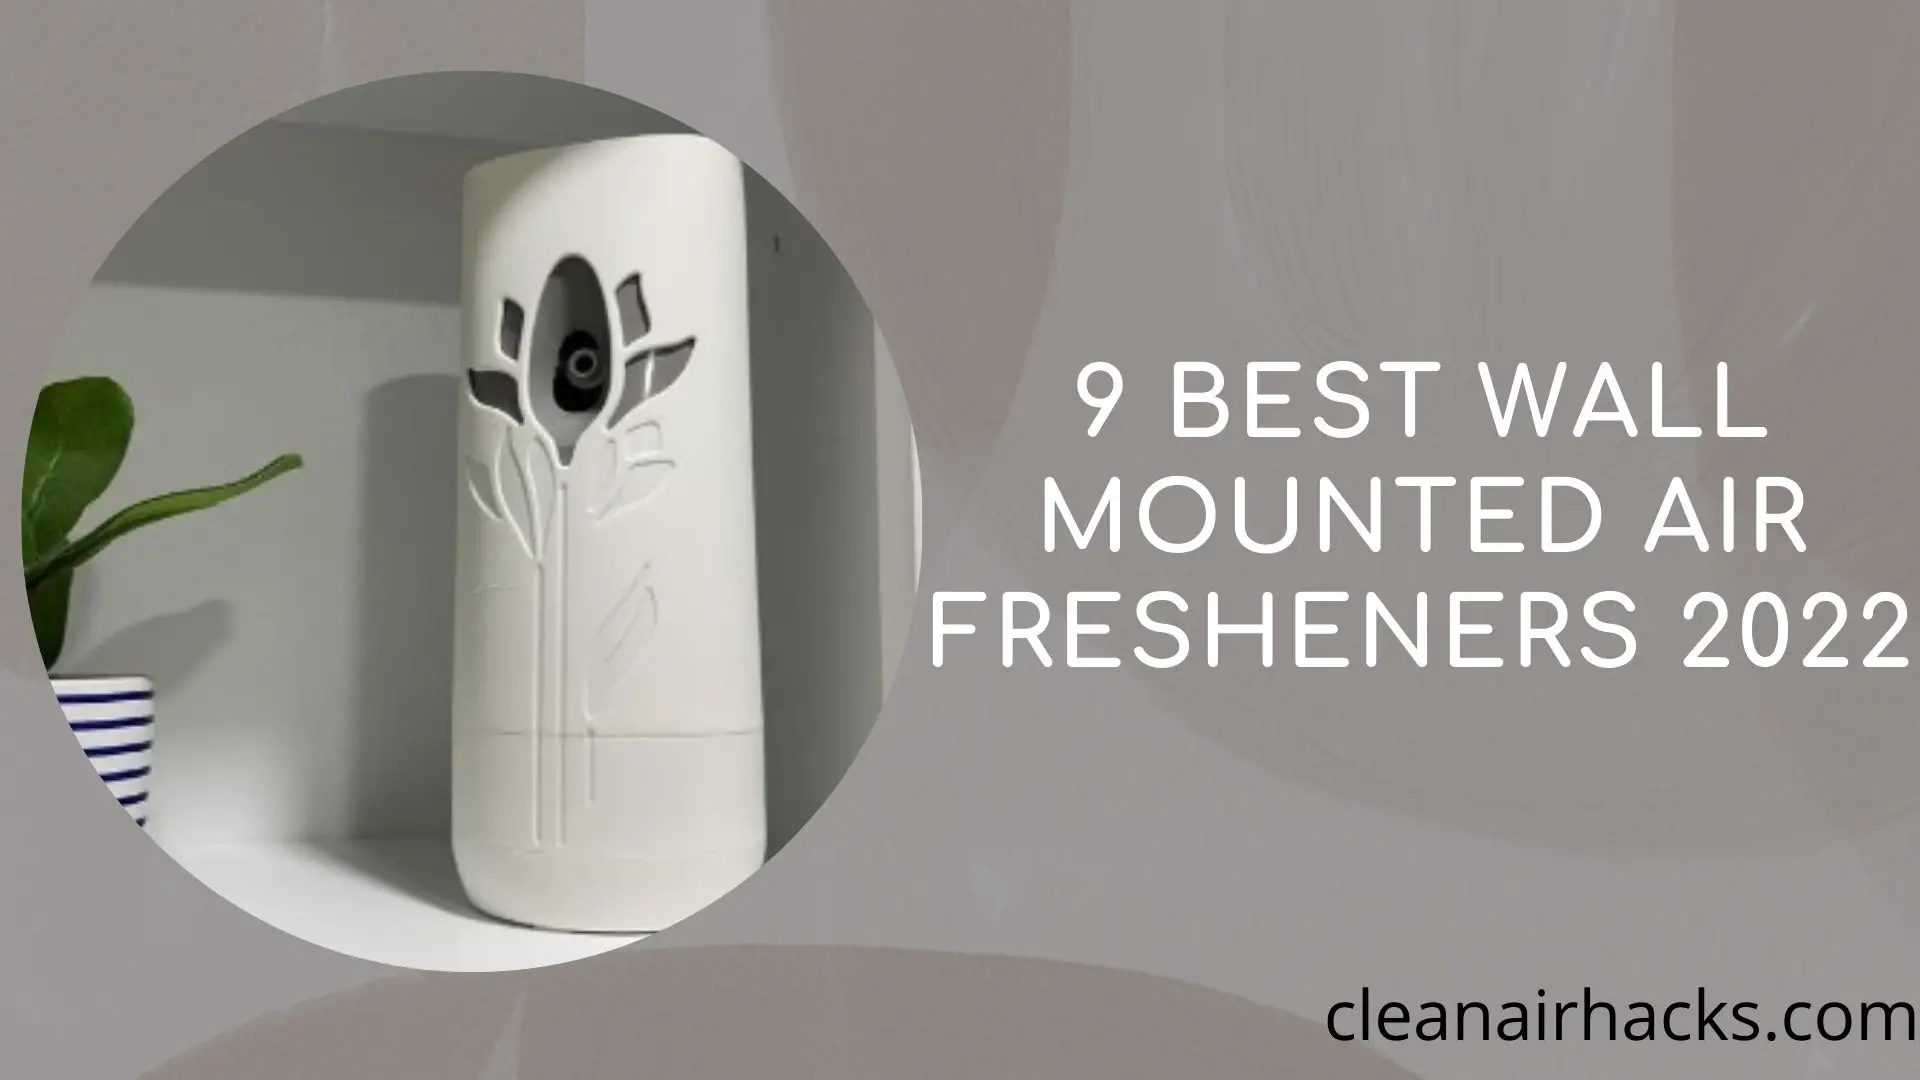 9 best wall mounted air fresheners of 2022